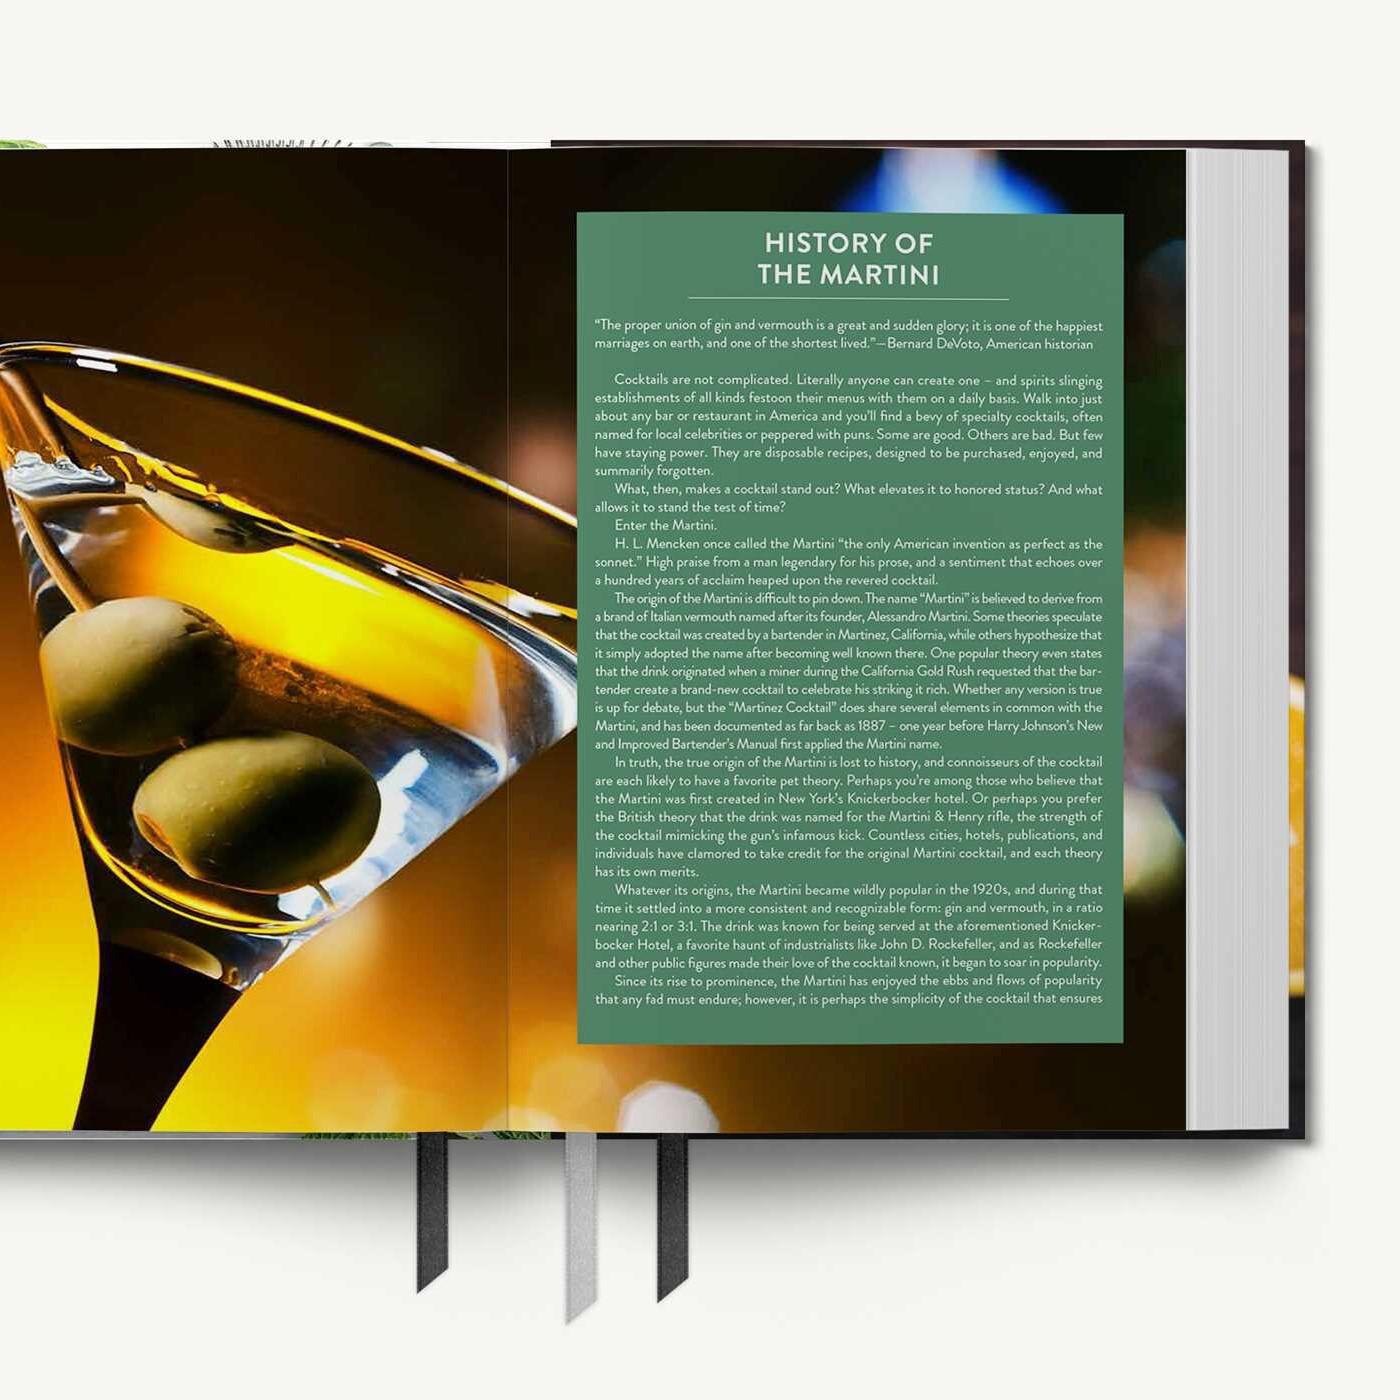 Book - Drink: The Ultimate Cocktail Book